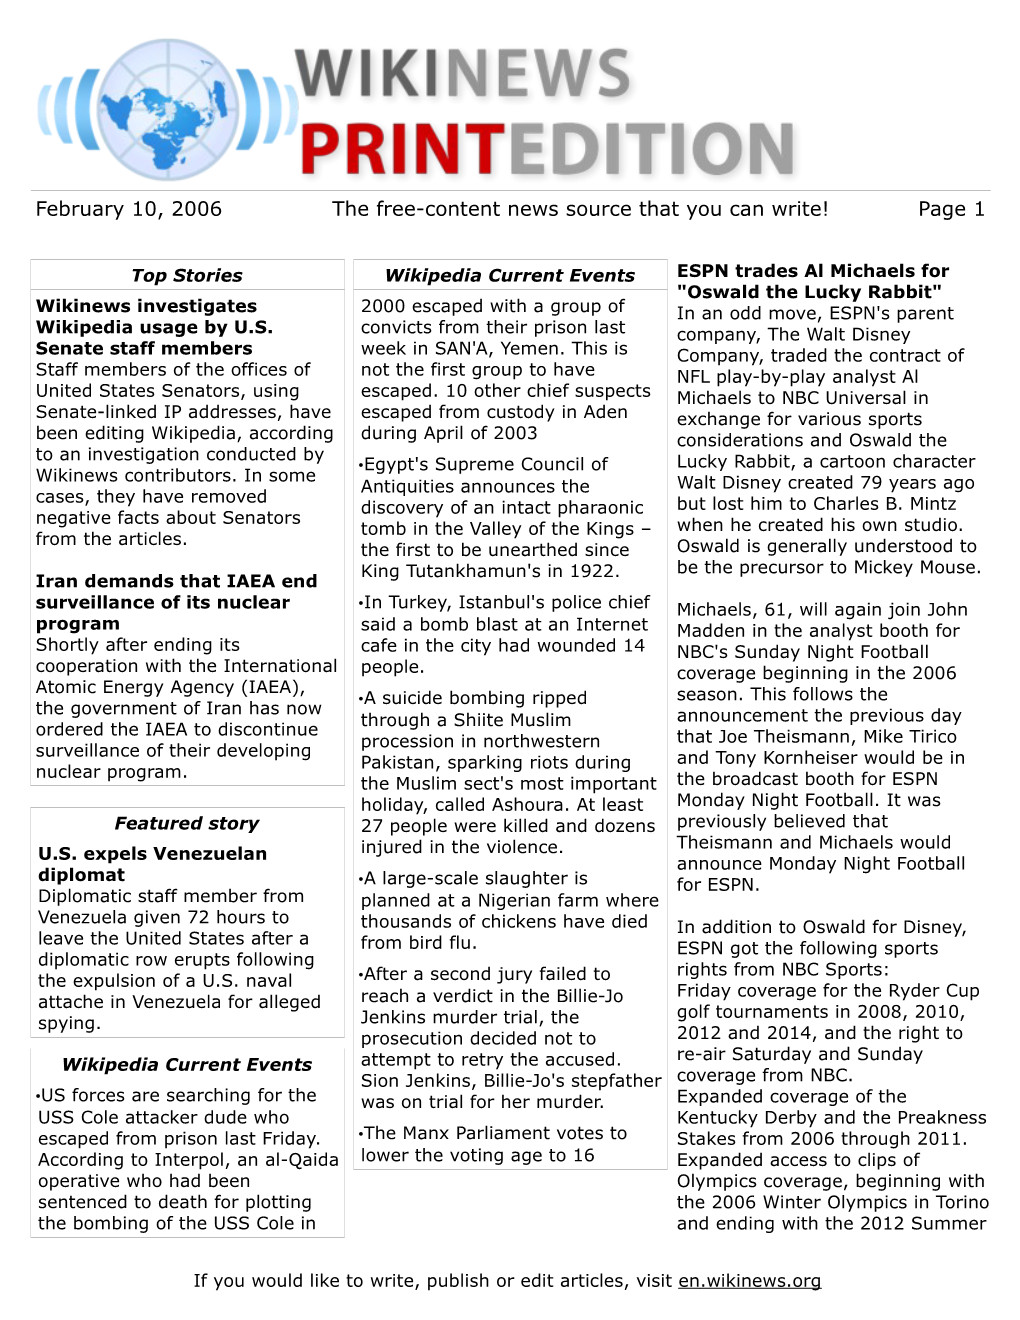 February 10, 2006 the Free-Content News Source That You Can Write! Page 1